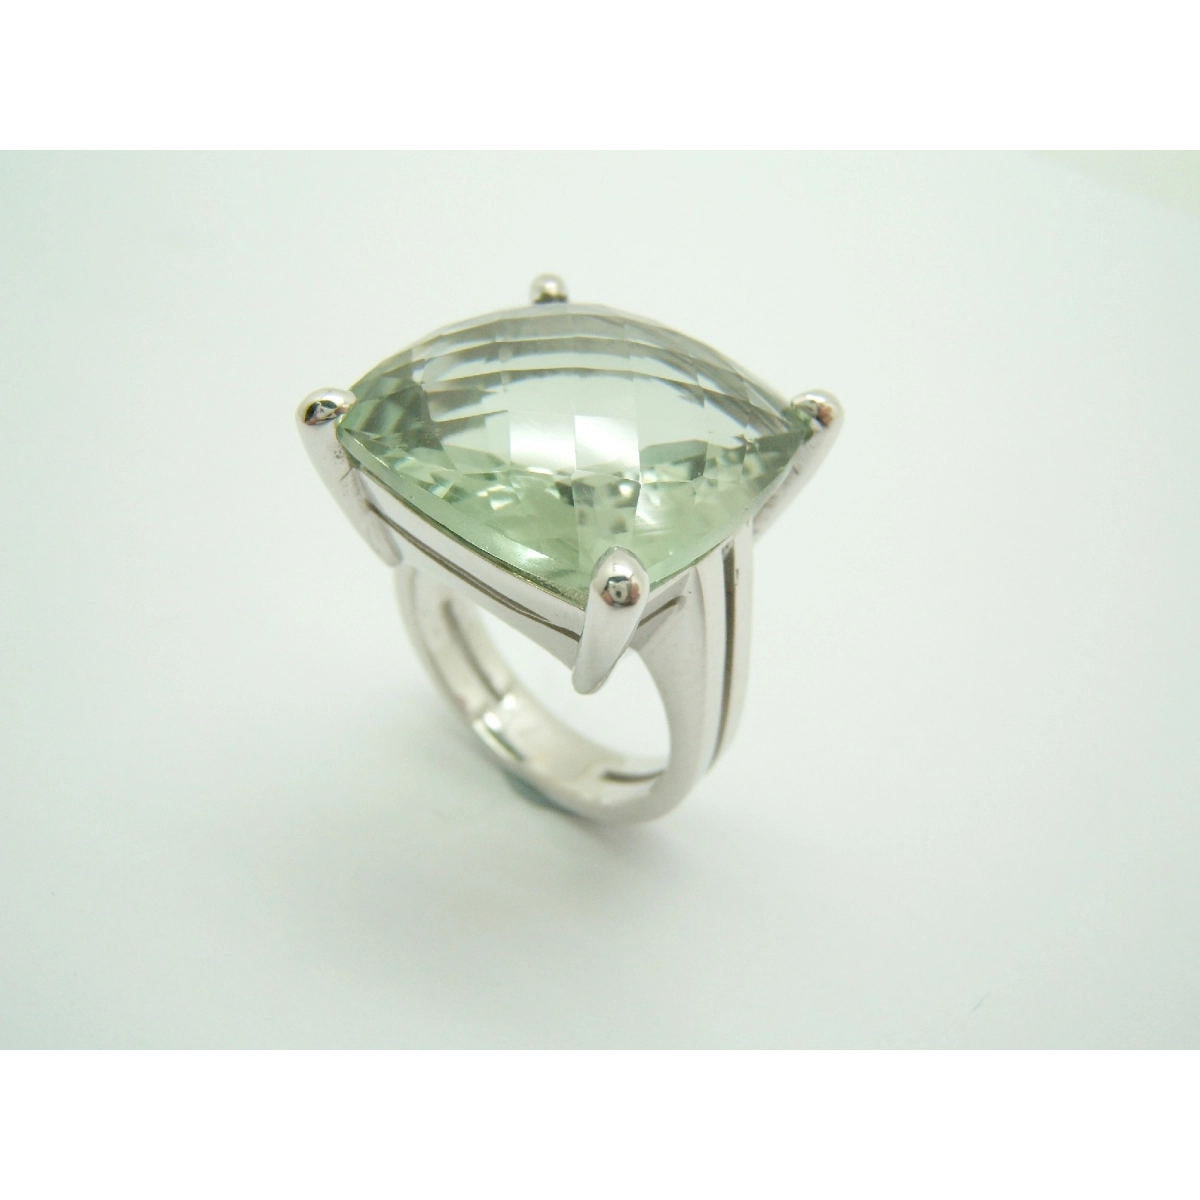 RING SILVER AND PRASIOLITE TO-81/97-18 B-79 A-81/97-18